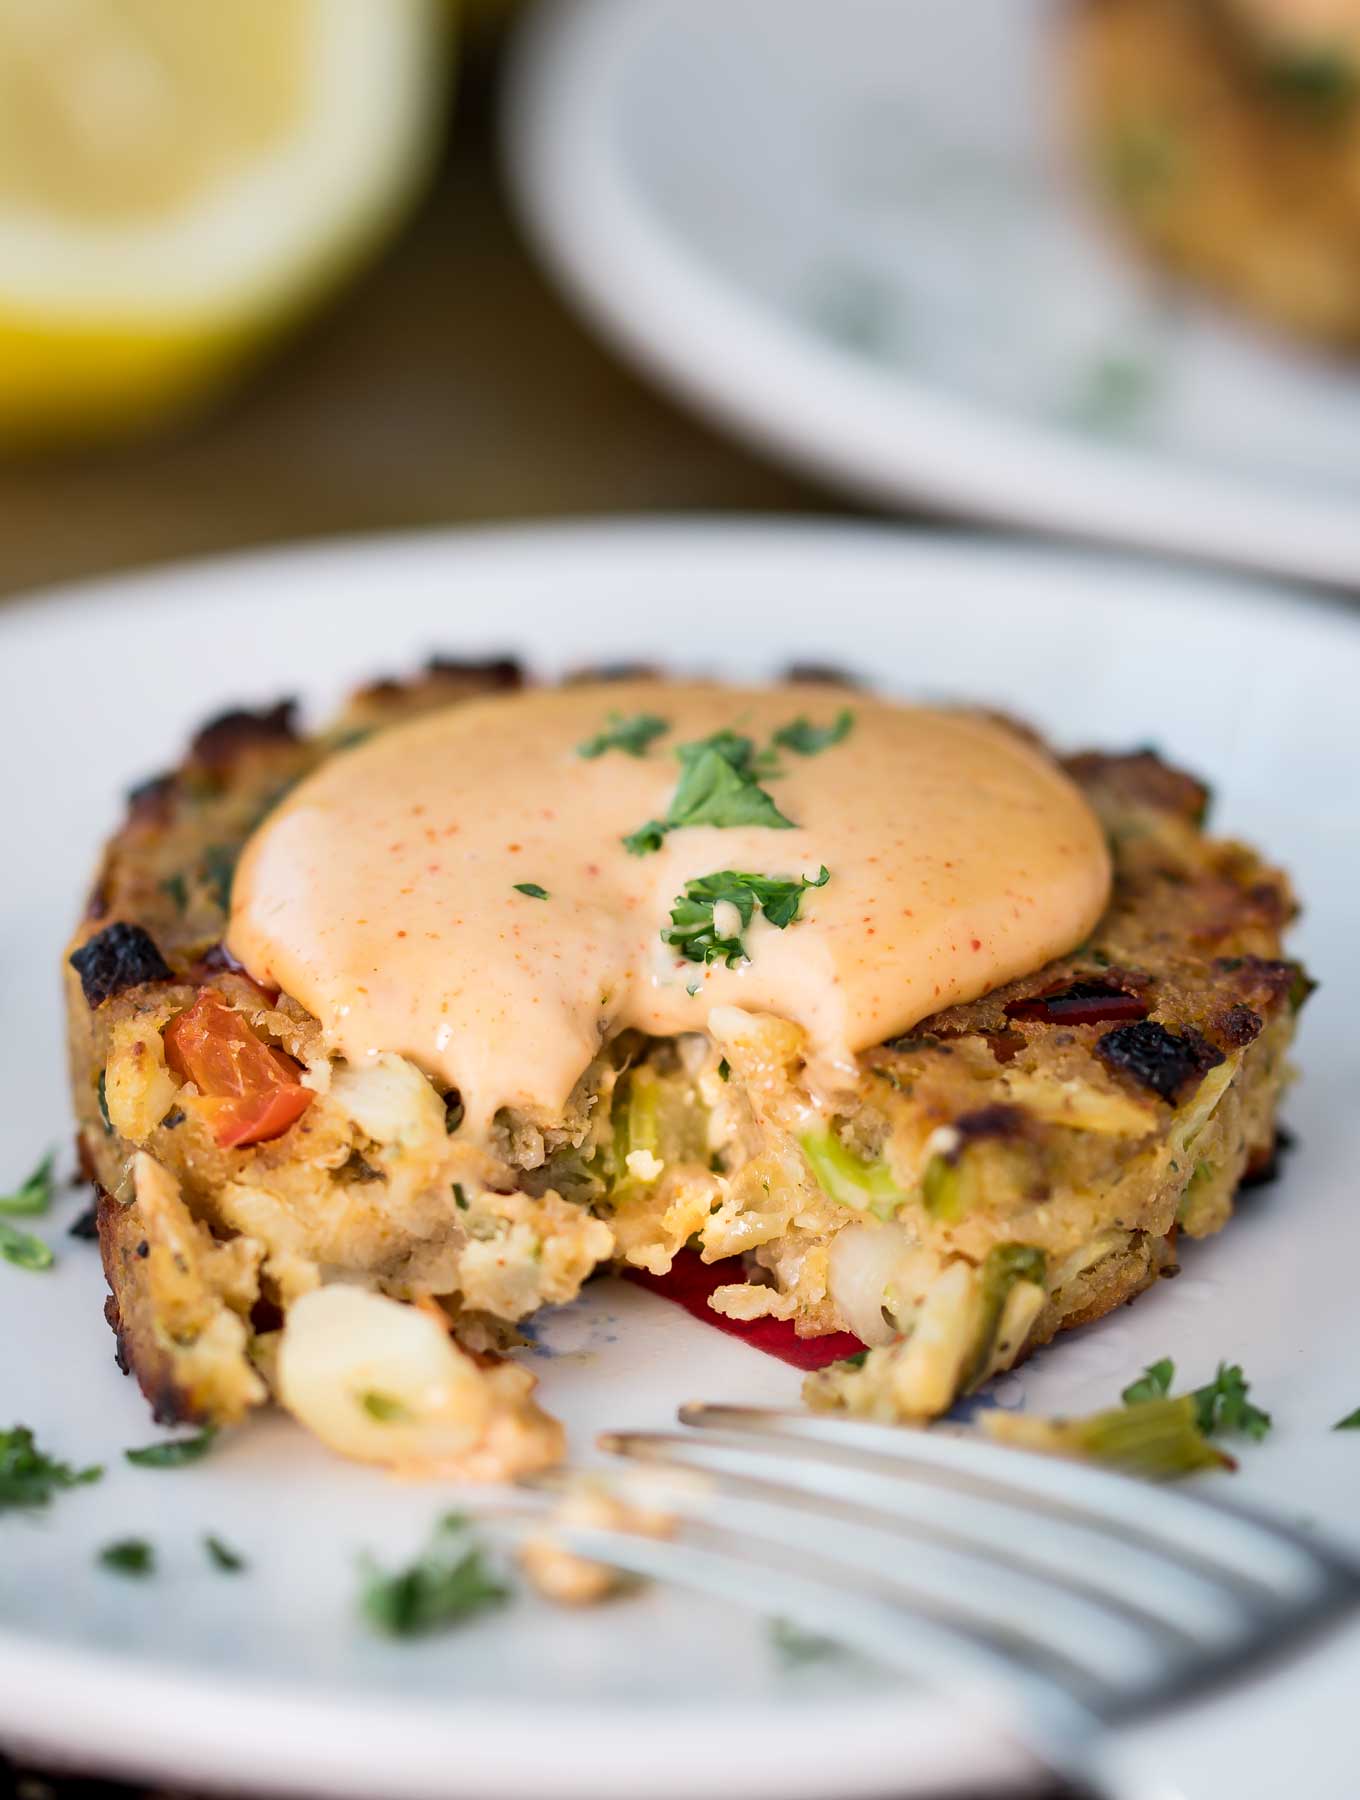 Faux crab cake with chipotle aioli on a plate